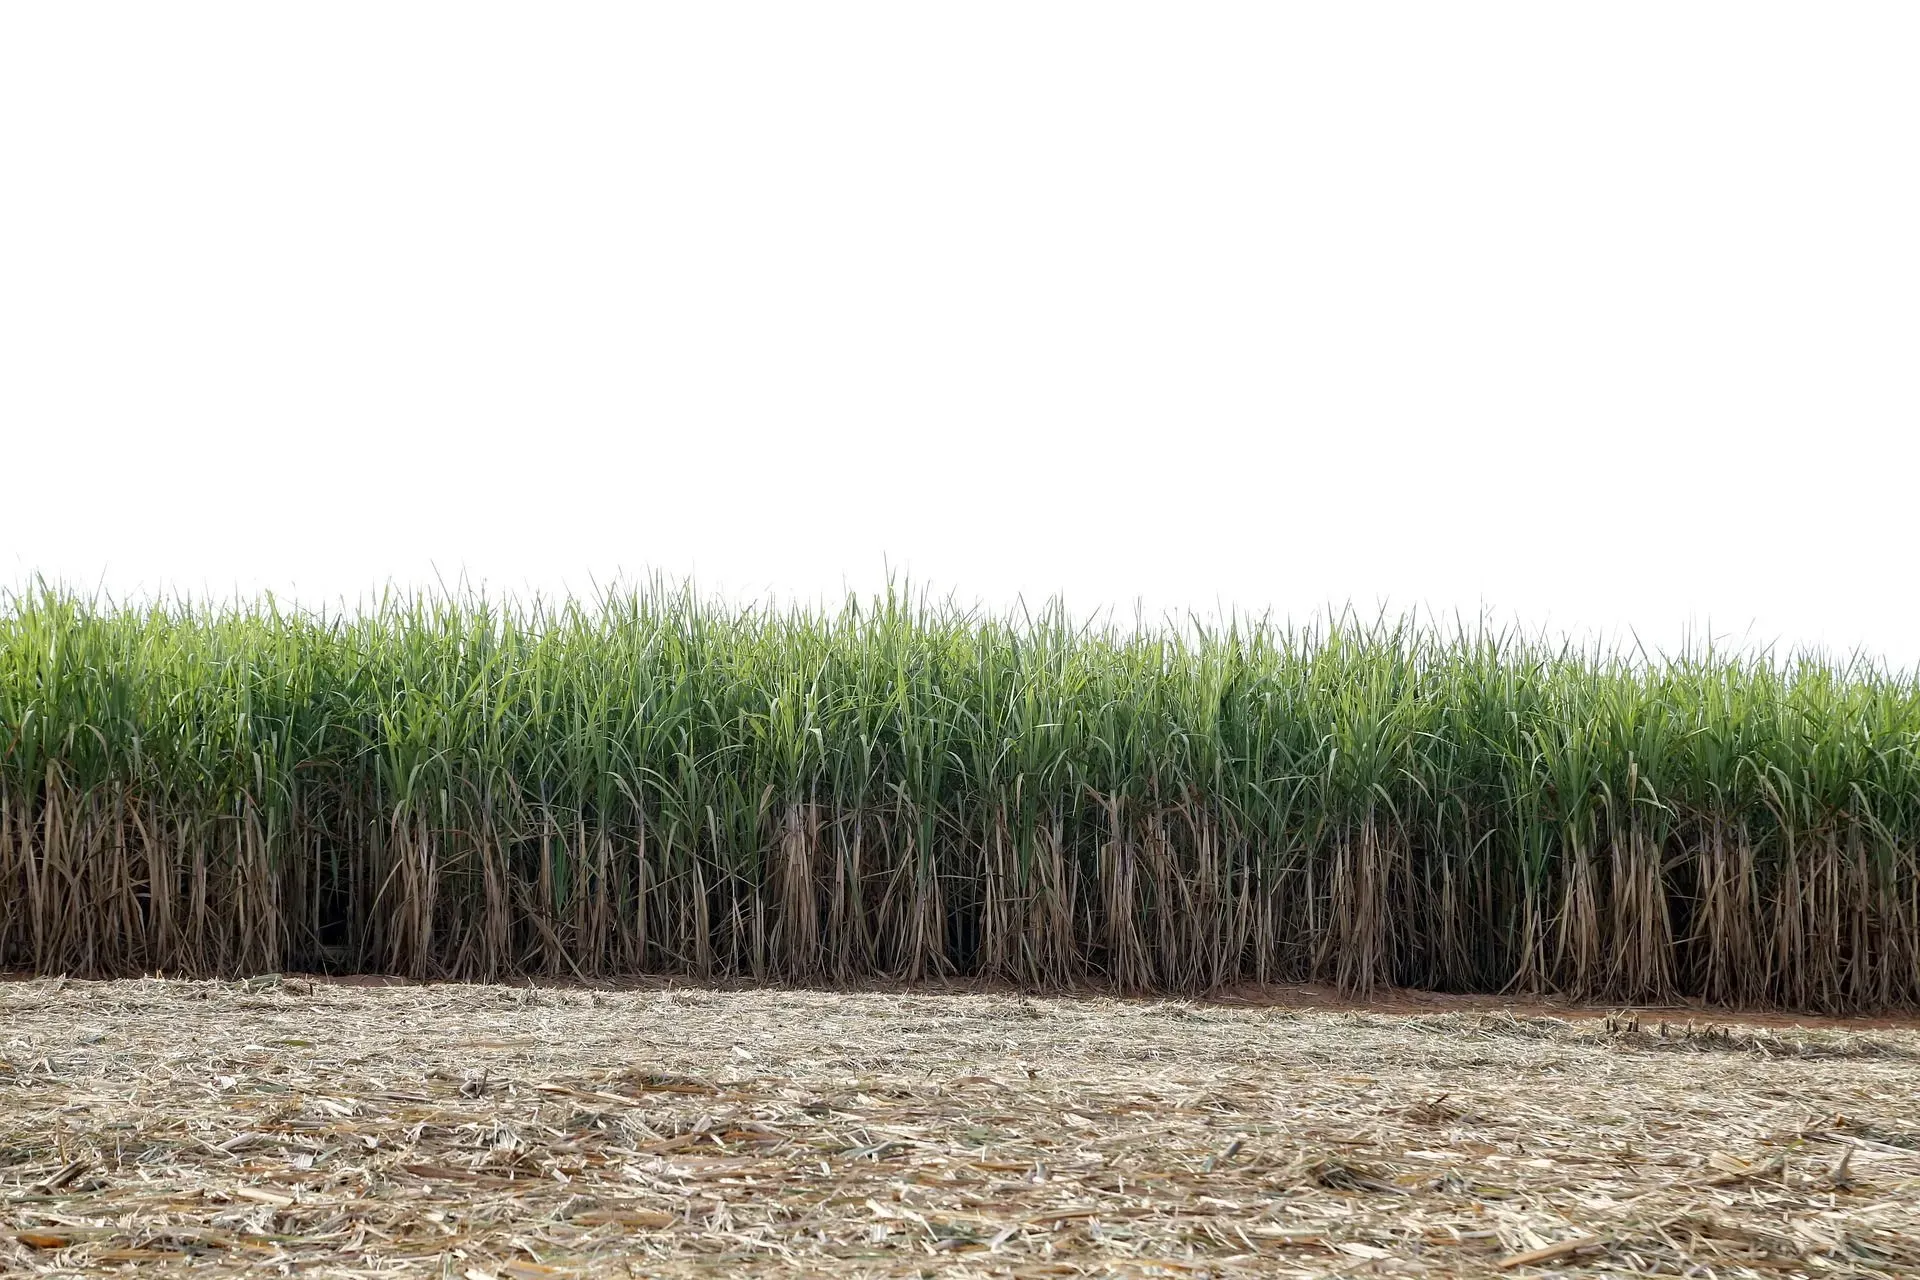 Brazil agriculture facts will help you know why it is the world's largest producer of sugarcane.